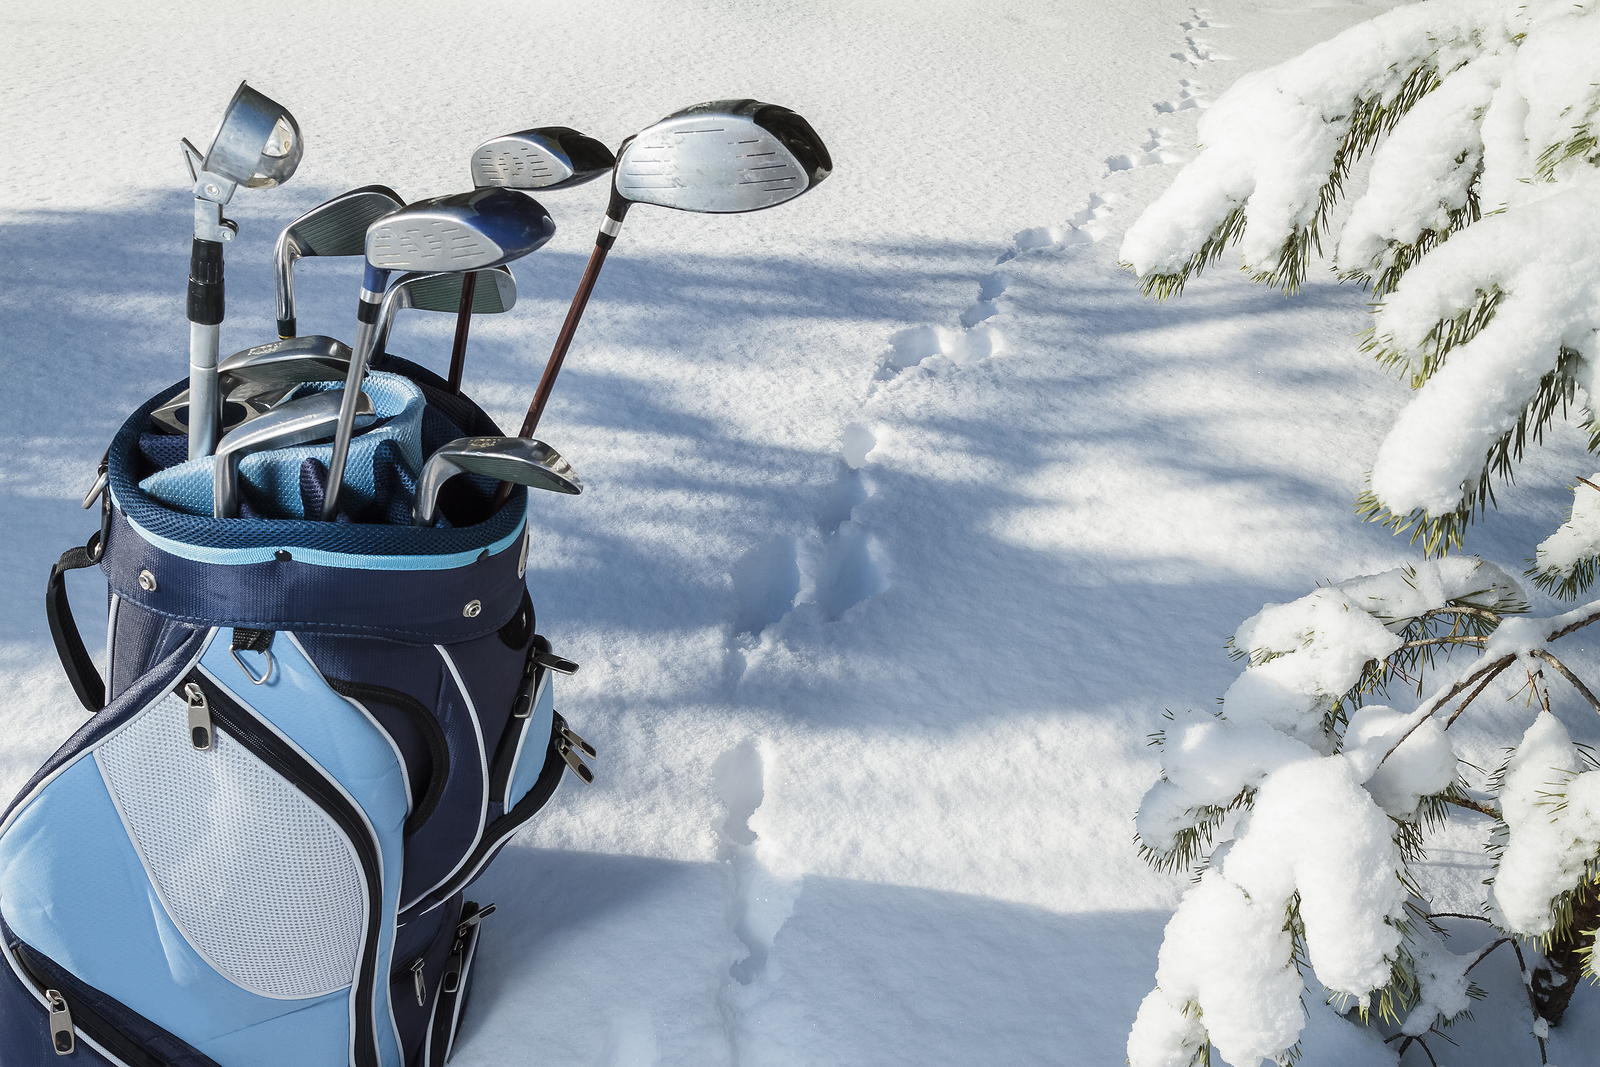 Winter Golf Tips: 8 Ways to Play your Best in the Cold - The Left